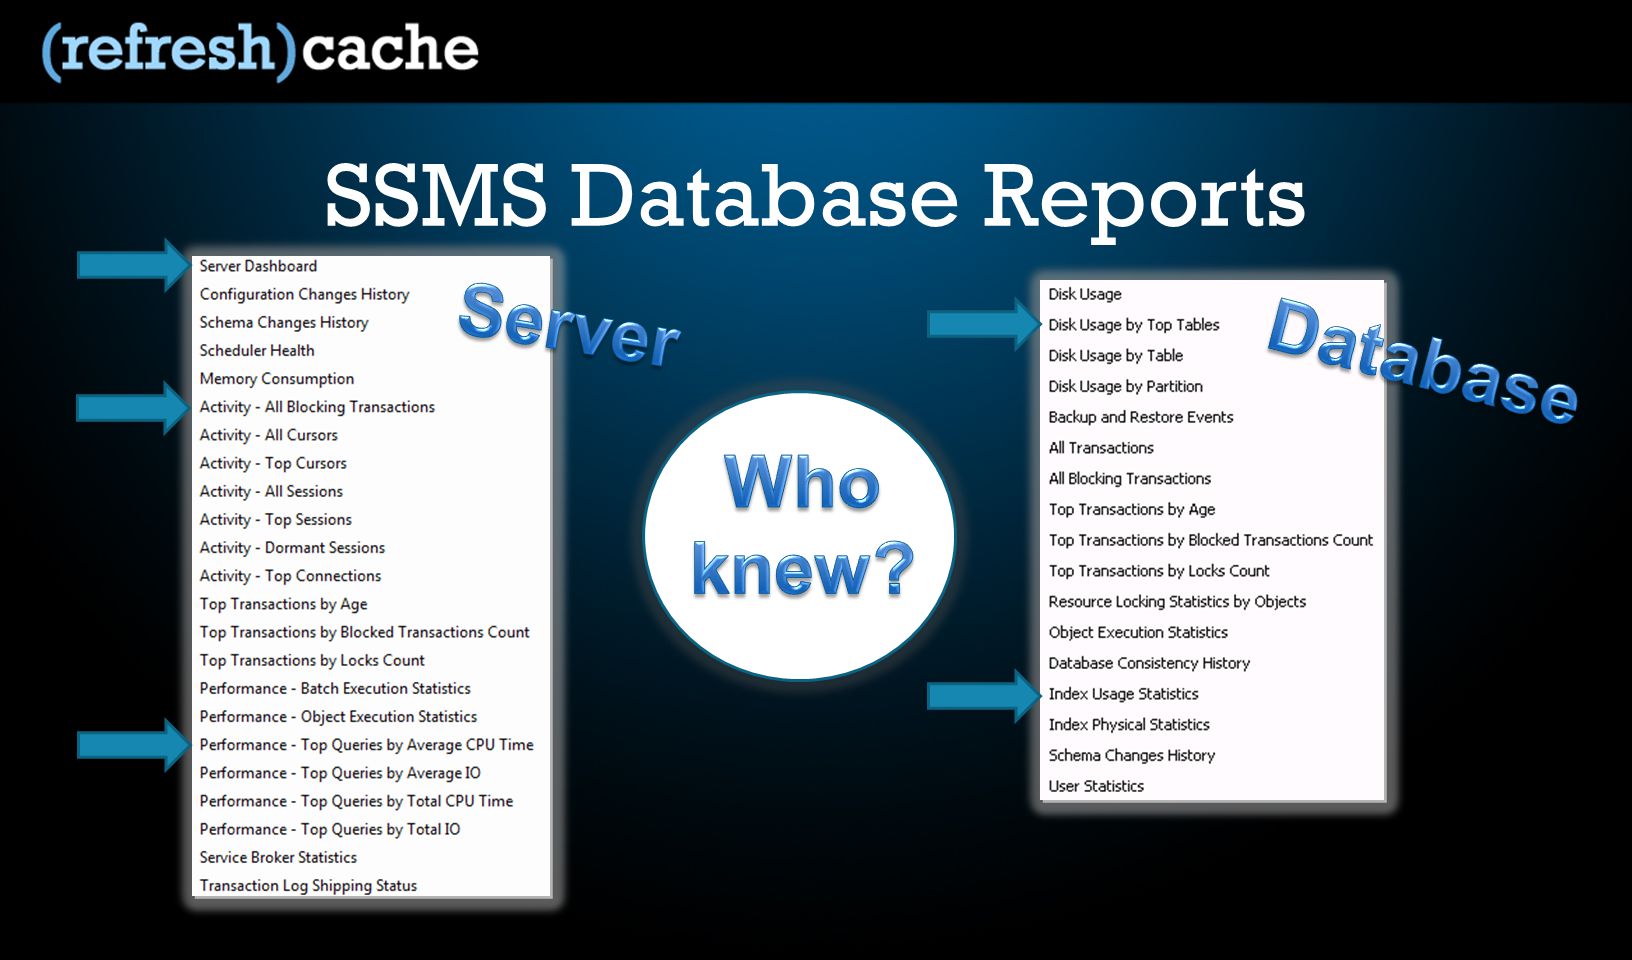 SSMS Database Reports